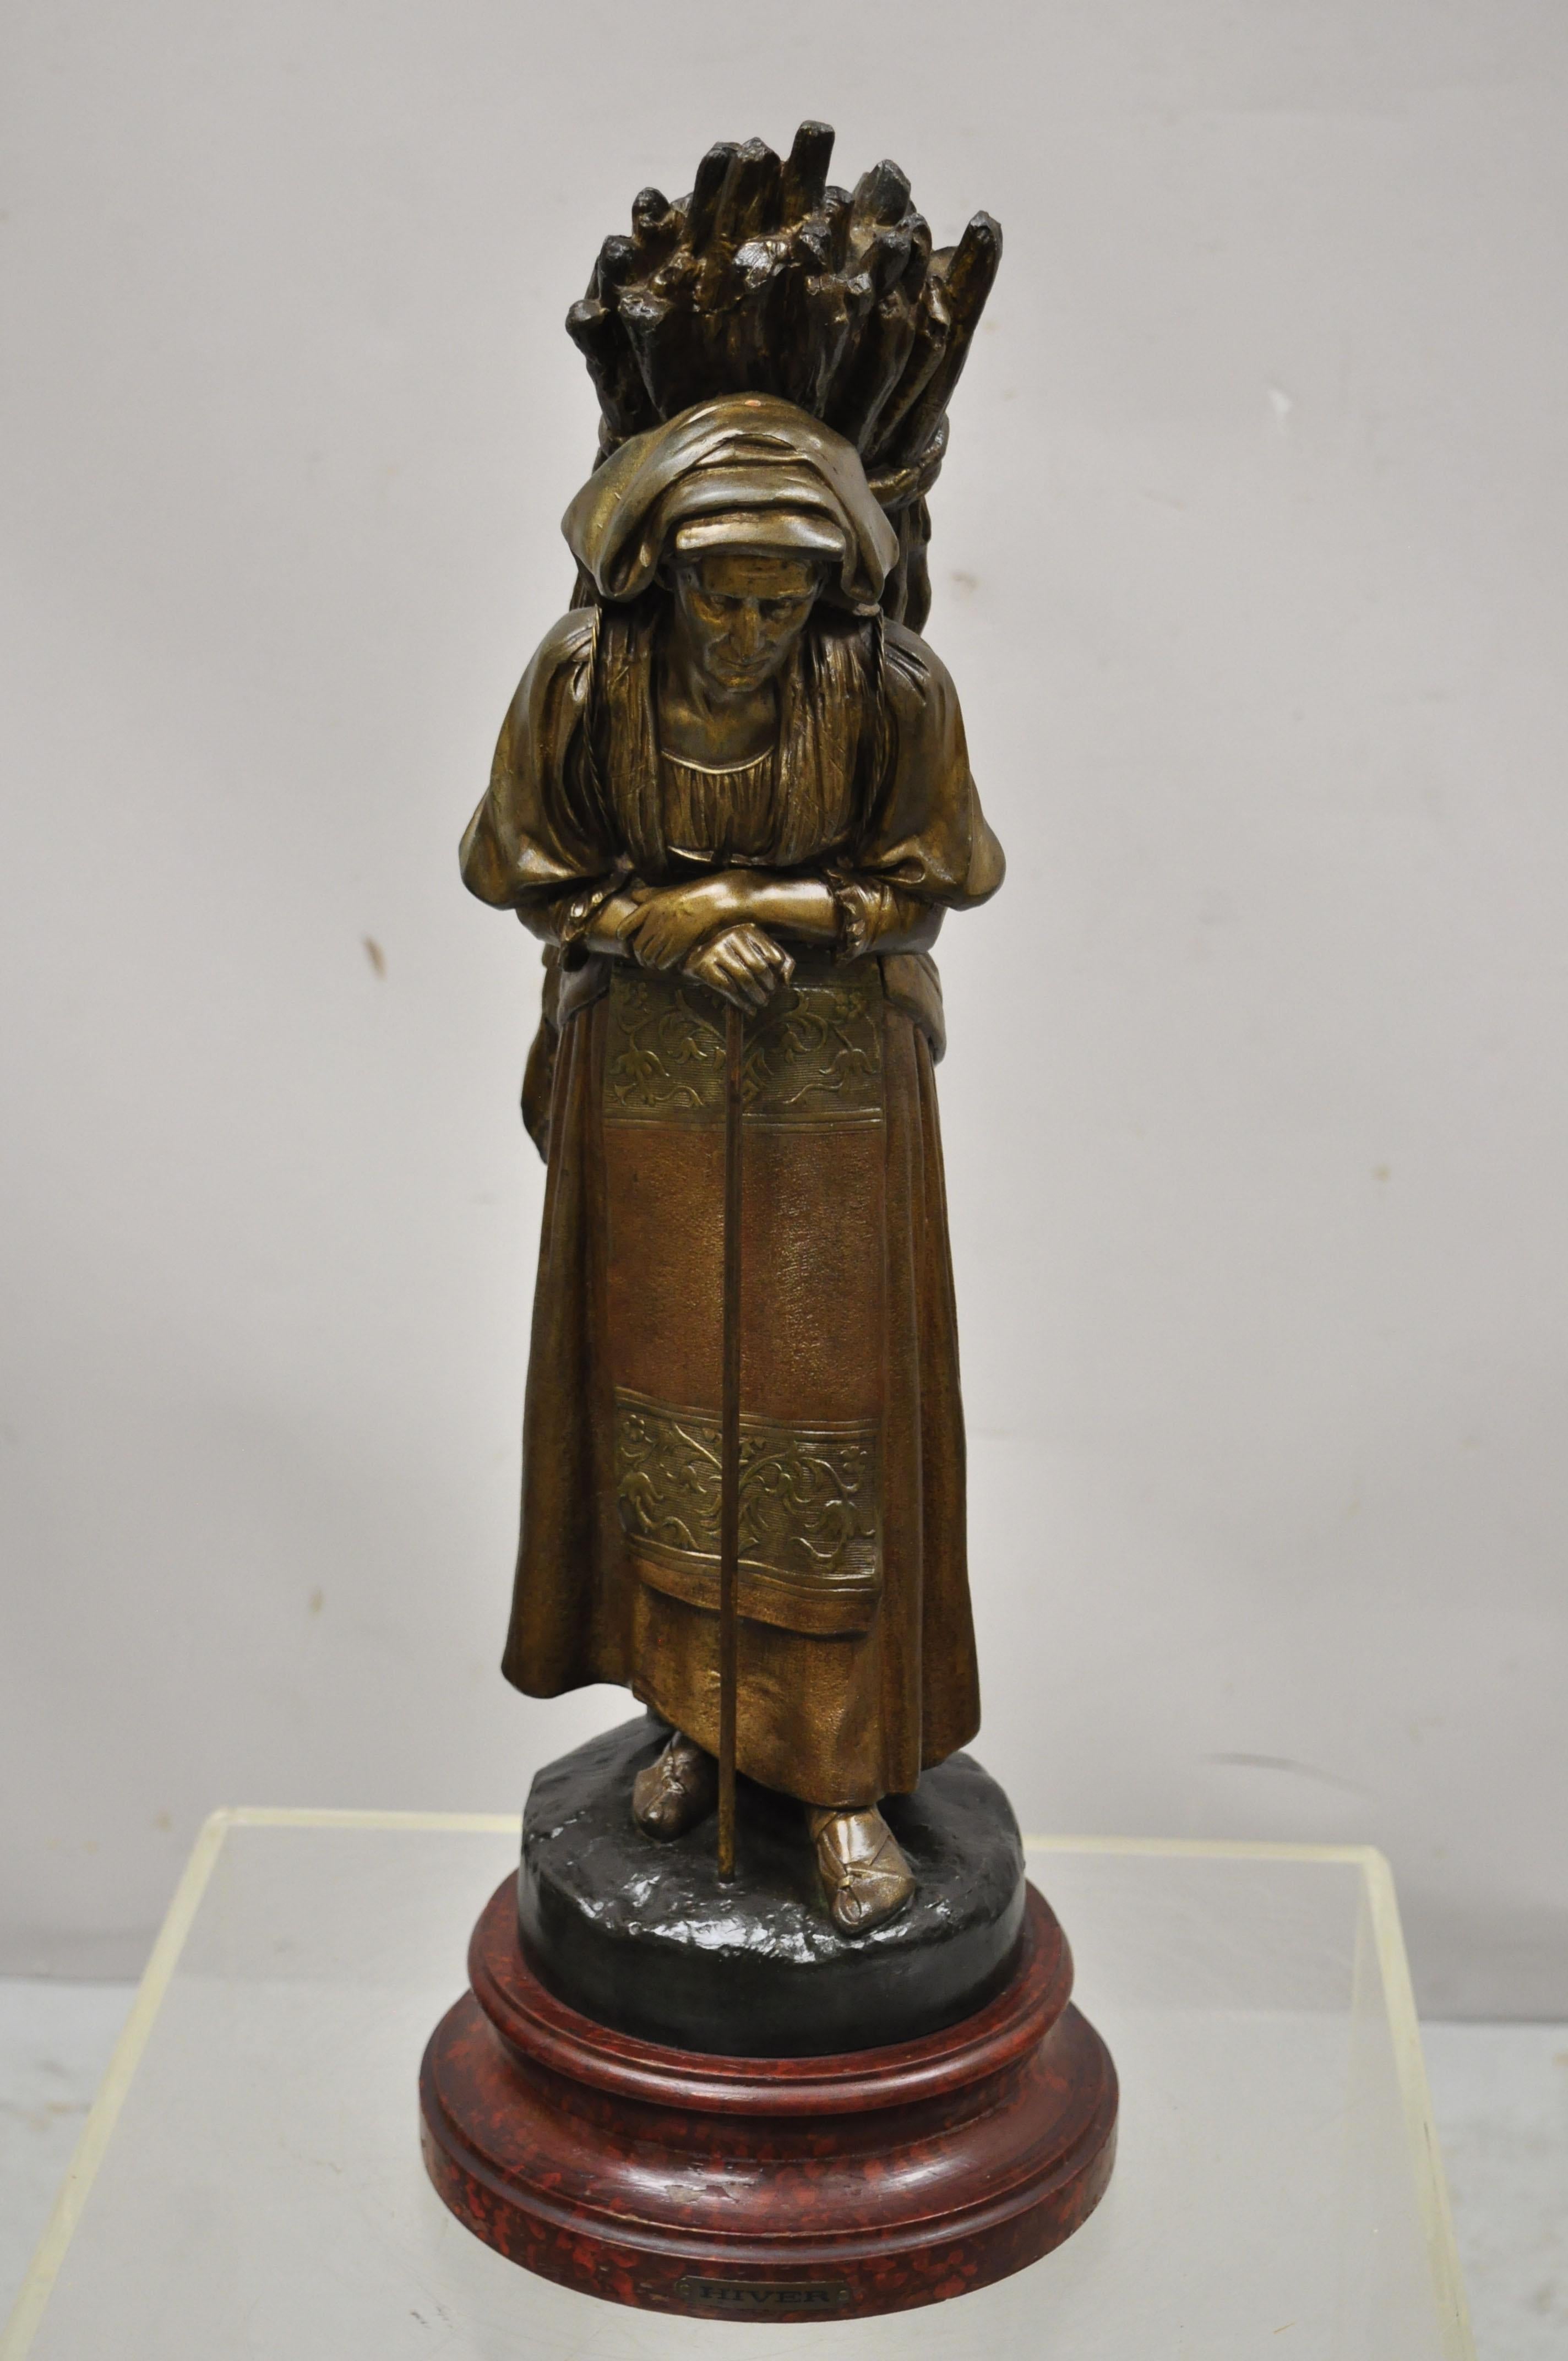 Antique French Spelter Sculpture Statue of Woman Carrying Bundle of Sticks Causset Cadet ? Cast spelter metal figure of woman carrying a bundle of sticks on her back, painted wooden base, metal tag which reads 